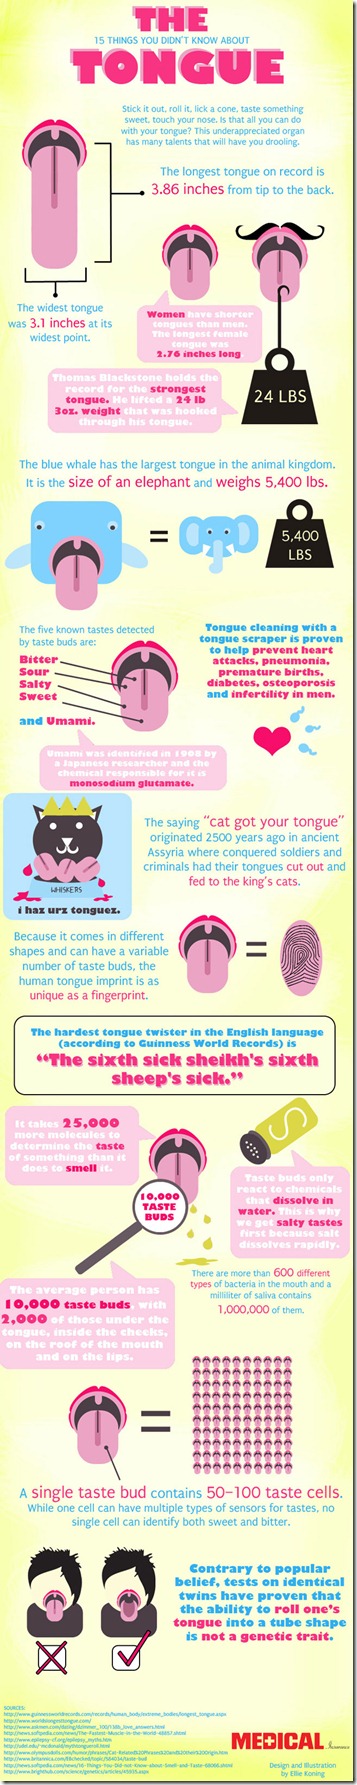 tongue-infographic